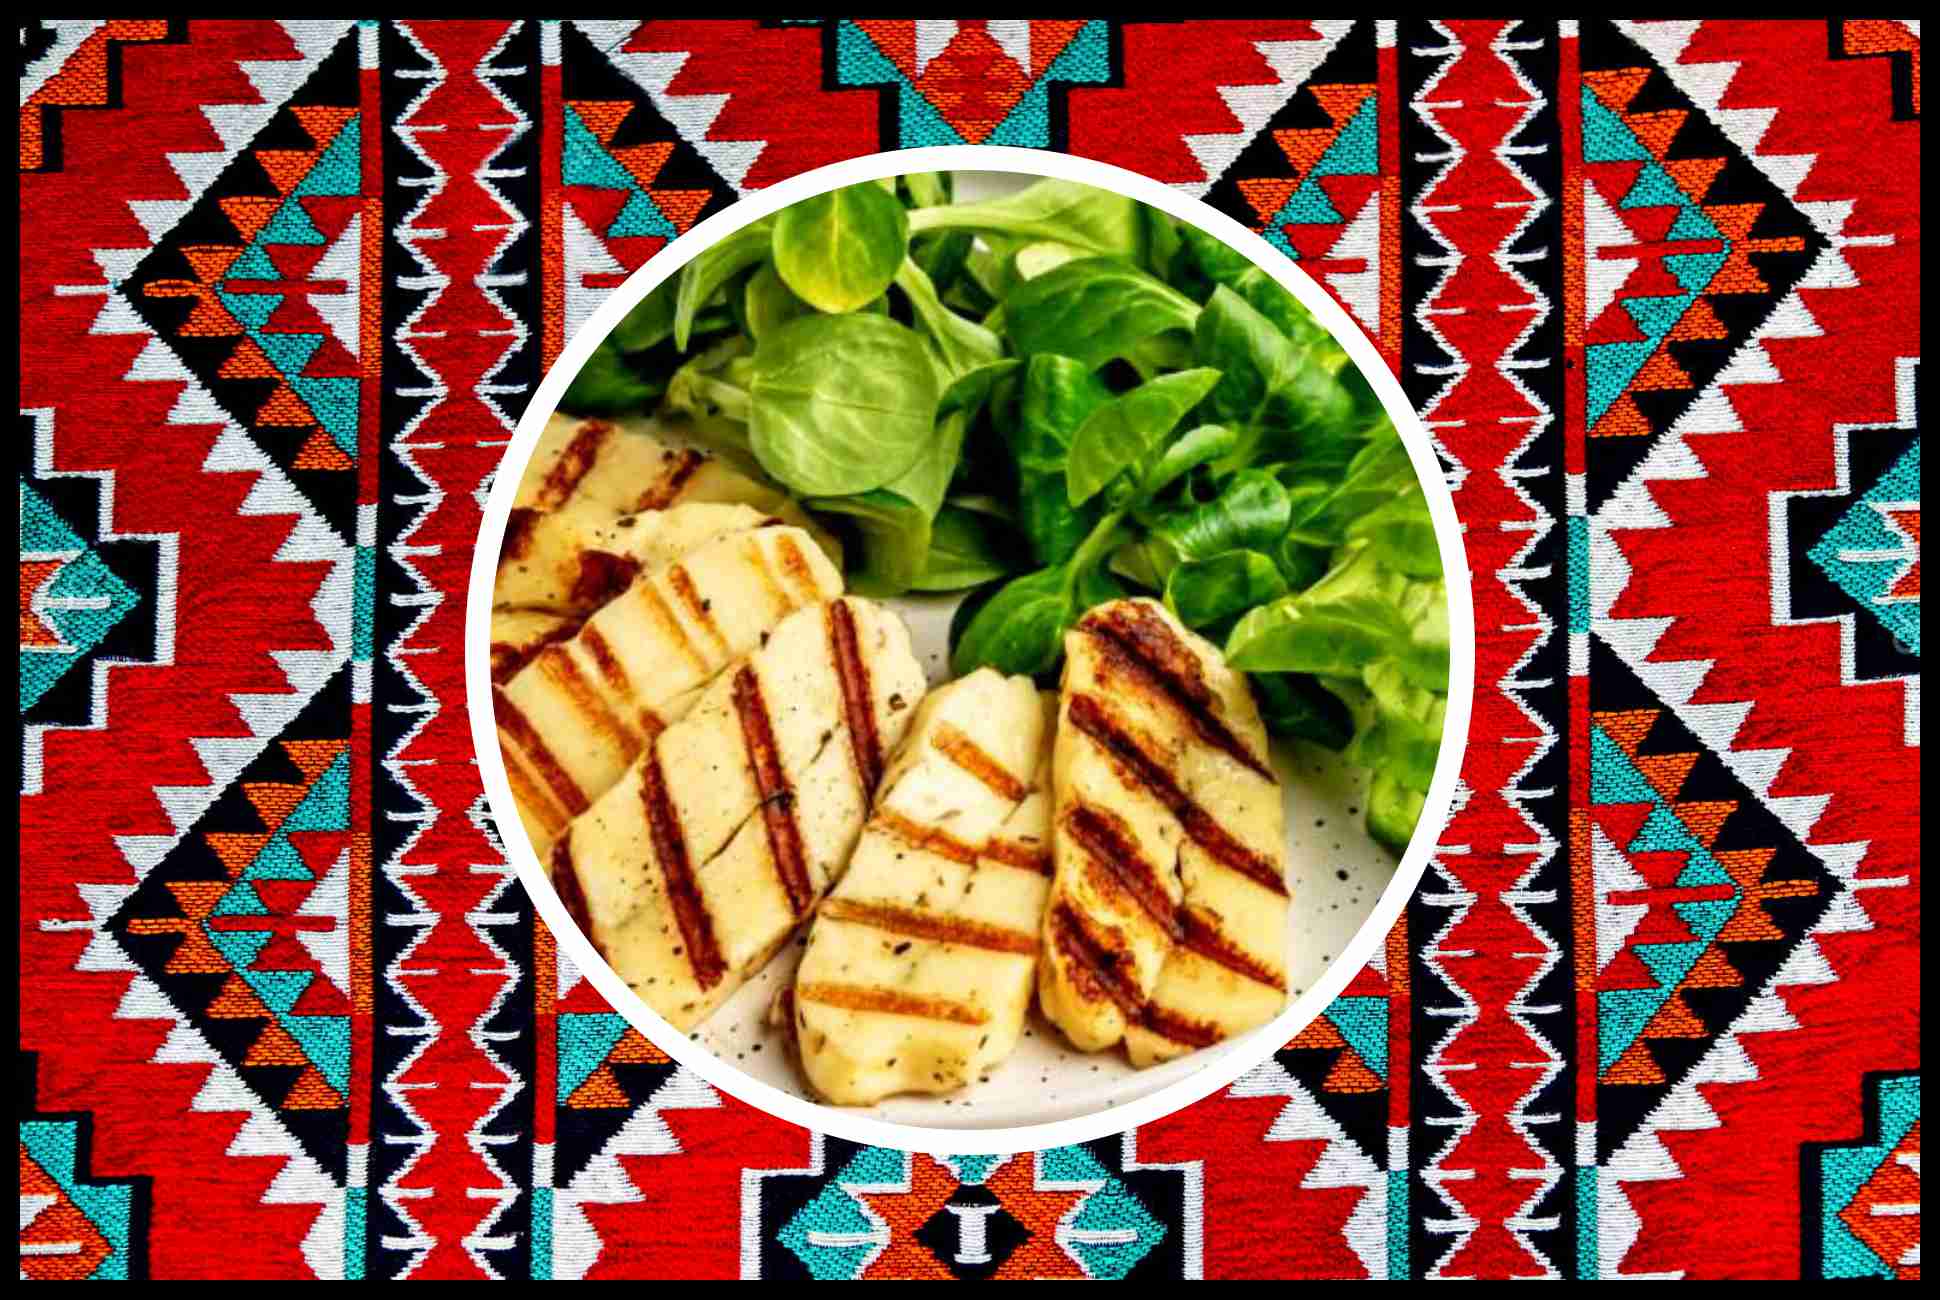 Hot Appetizer; Grilled Halloumi Cheese; My Mom's Recipe; Petra Dining; Culinary Delight; Local Cuisine; Gourmet Halloumi Dish; Jordanian Appetizer; Fine Dining Petra; Savory Halloumi Delight; Top Petra Restaurant; Exquisite Grilled Cheese; Petra Gastronomy; Best Halloumi in Petra; Unique Culinary Experience; Petra's Halloumi Specials; Premium Cheese Appetizer; Jordanian Culinary Gem; Halloumi Gastronomic Delight.